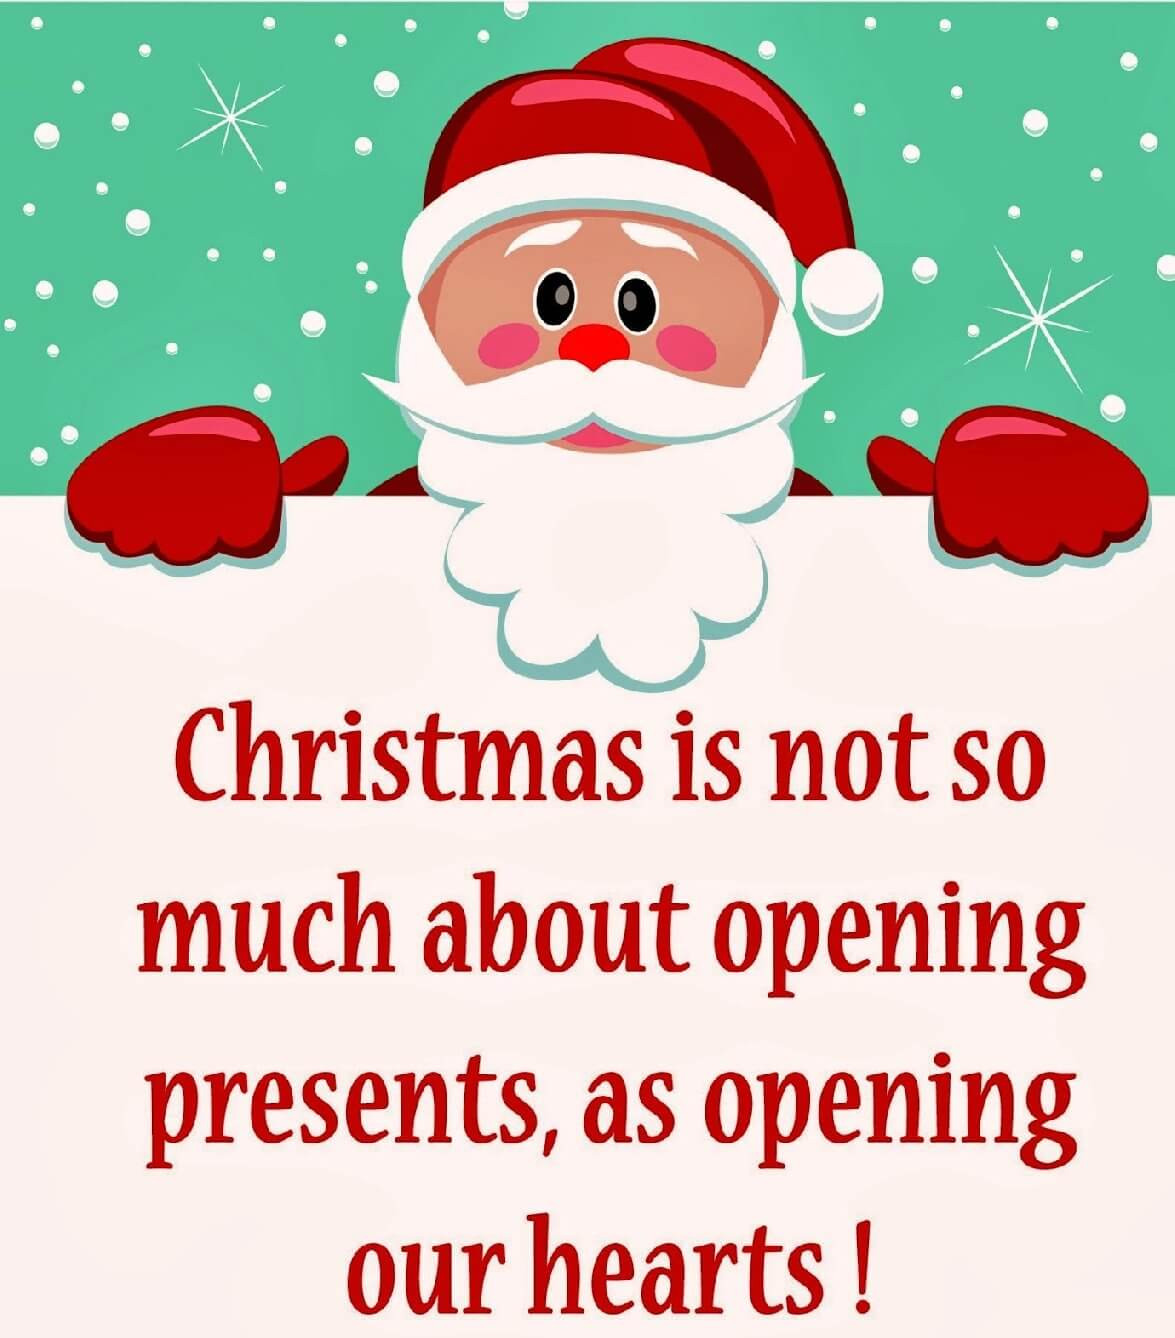 Merry Christmas Everyone Quote
 2017 Merry Xmas Quotes and Messages